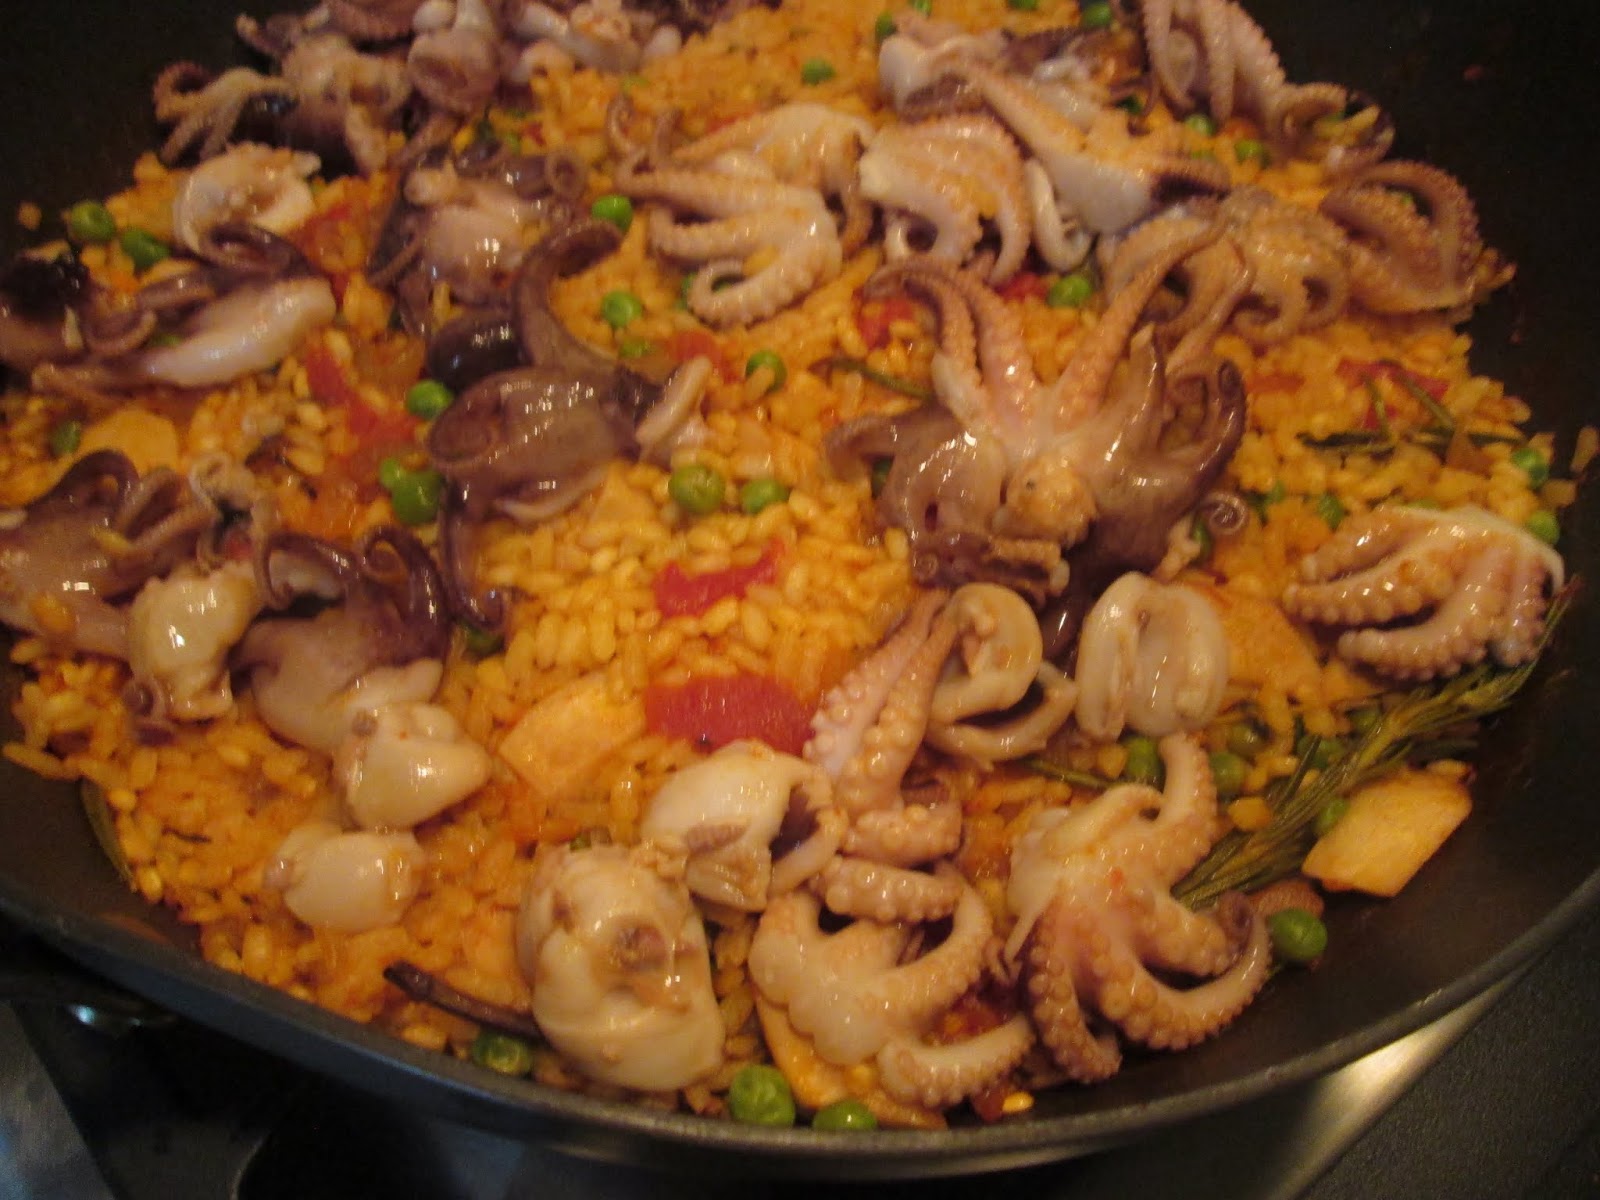 Popo's River: paella with baby octopus